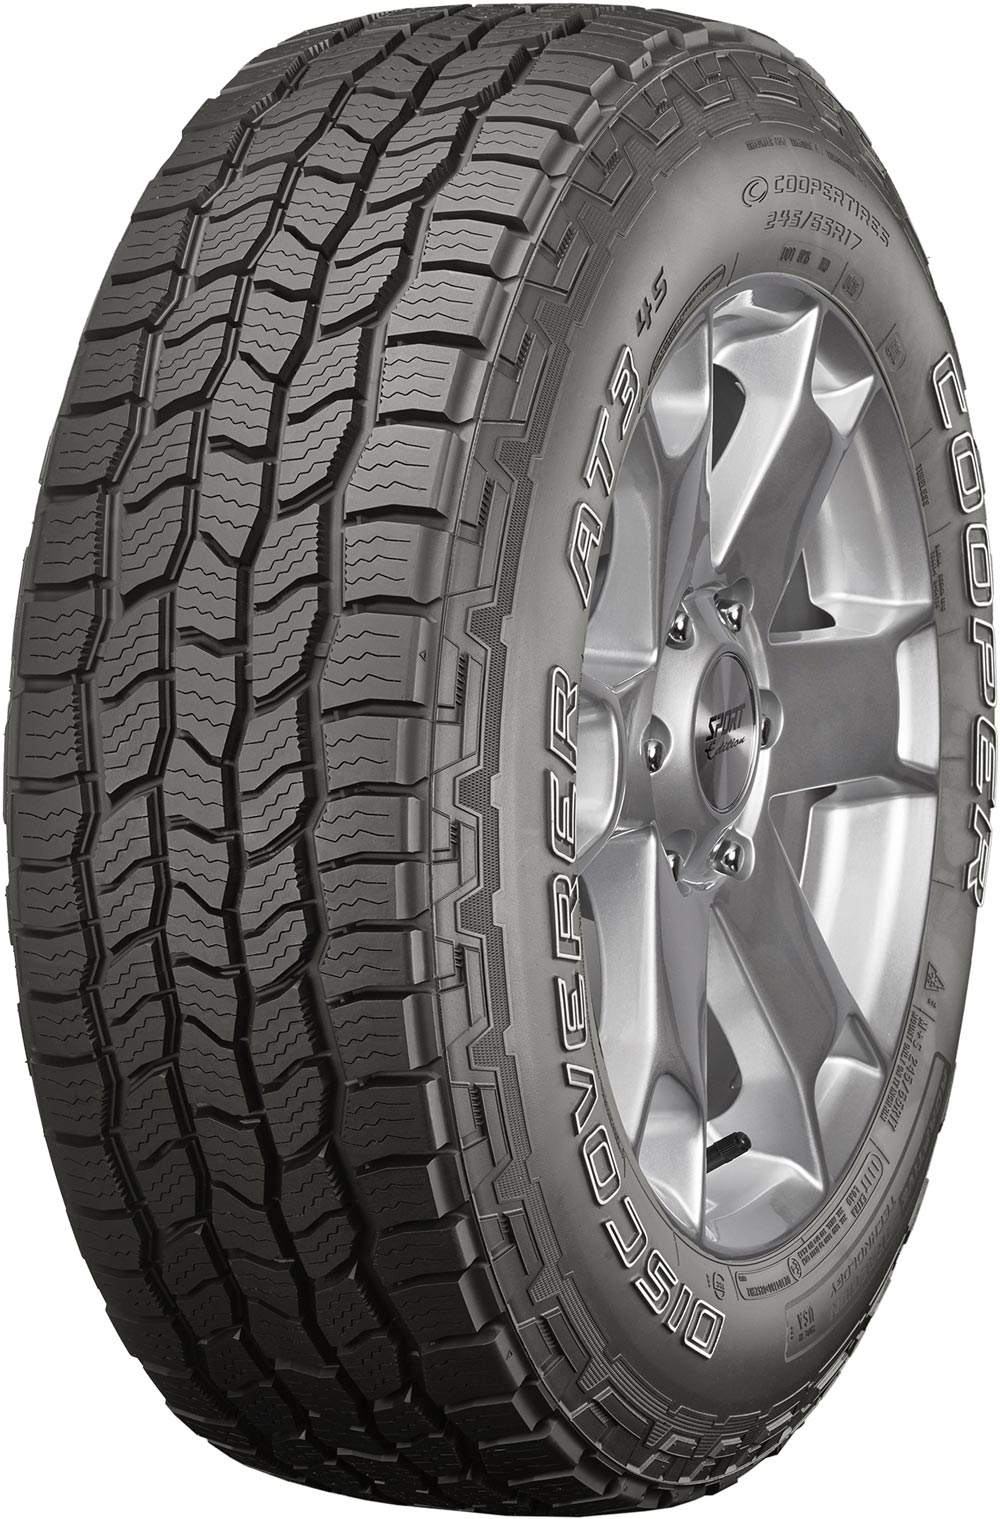 Джипови гуми COOPER DISCOVERER AT3 4S OWL 255/75 R17 115T